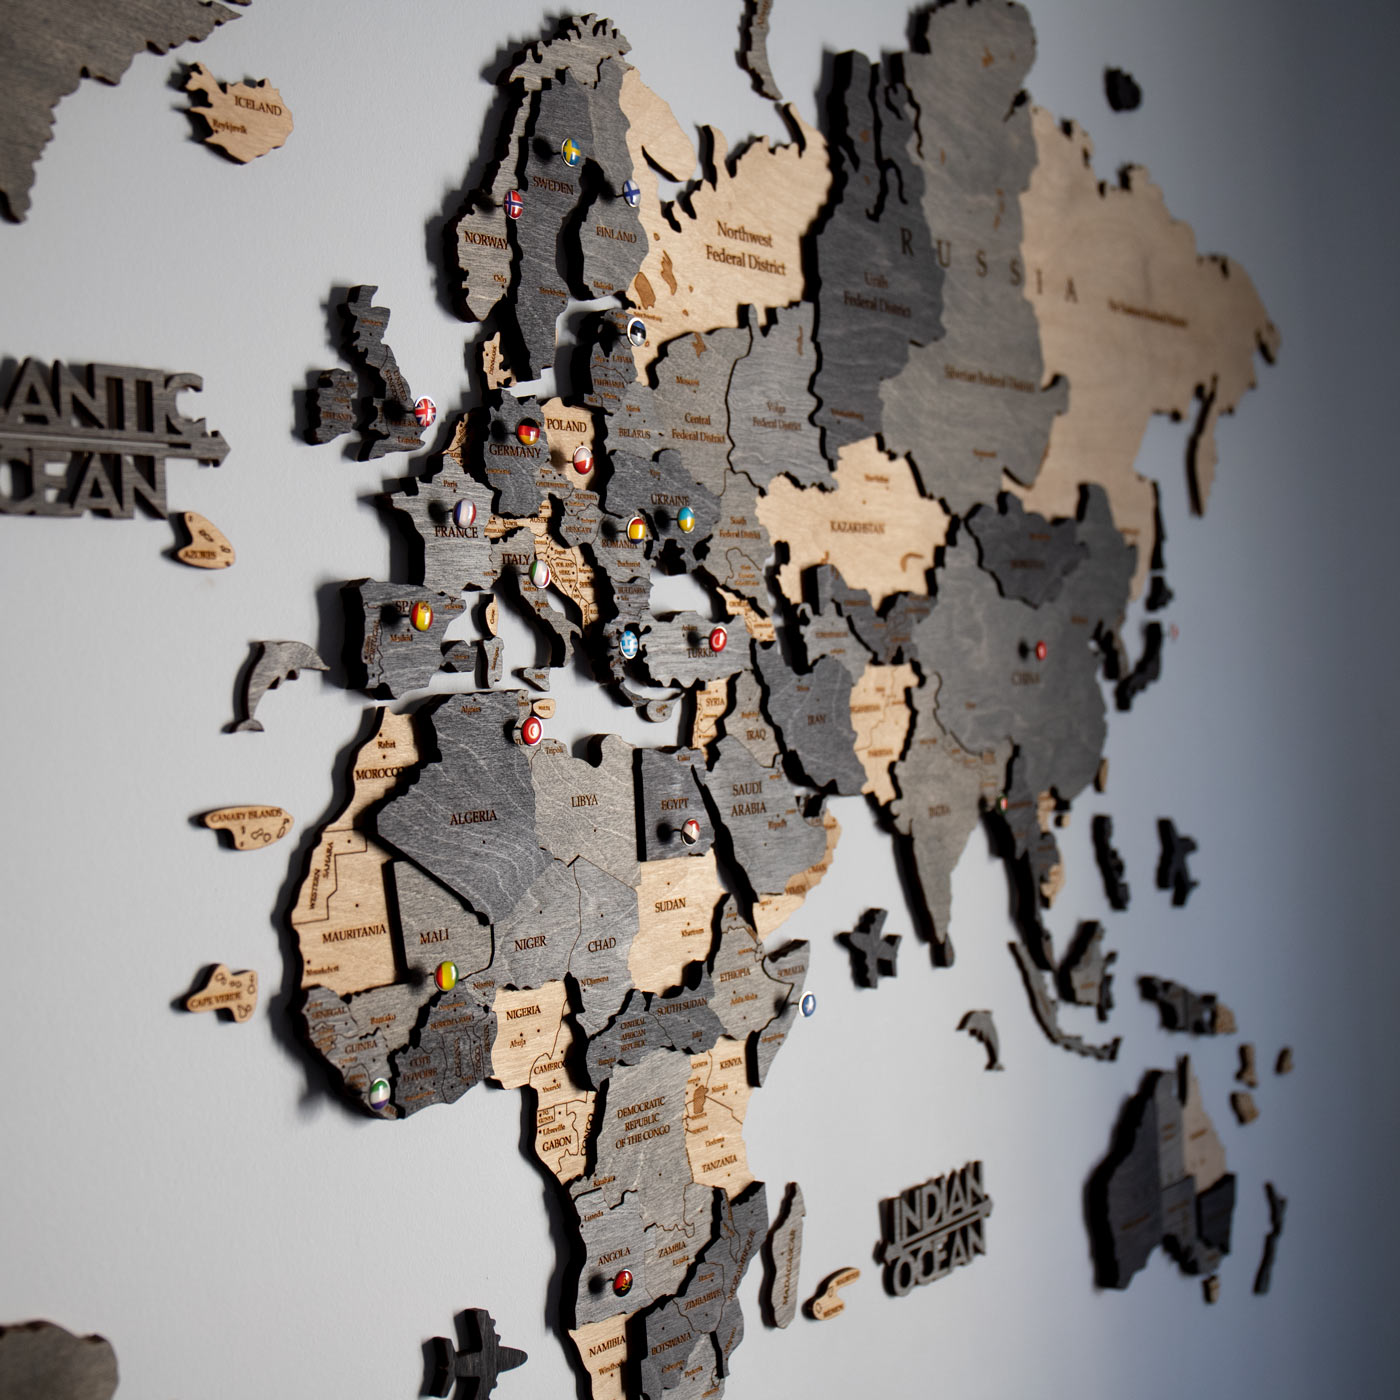 3d wooden world map. Wall wooden decor. Map with gray and beige shades. Ksilart